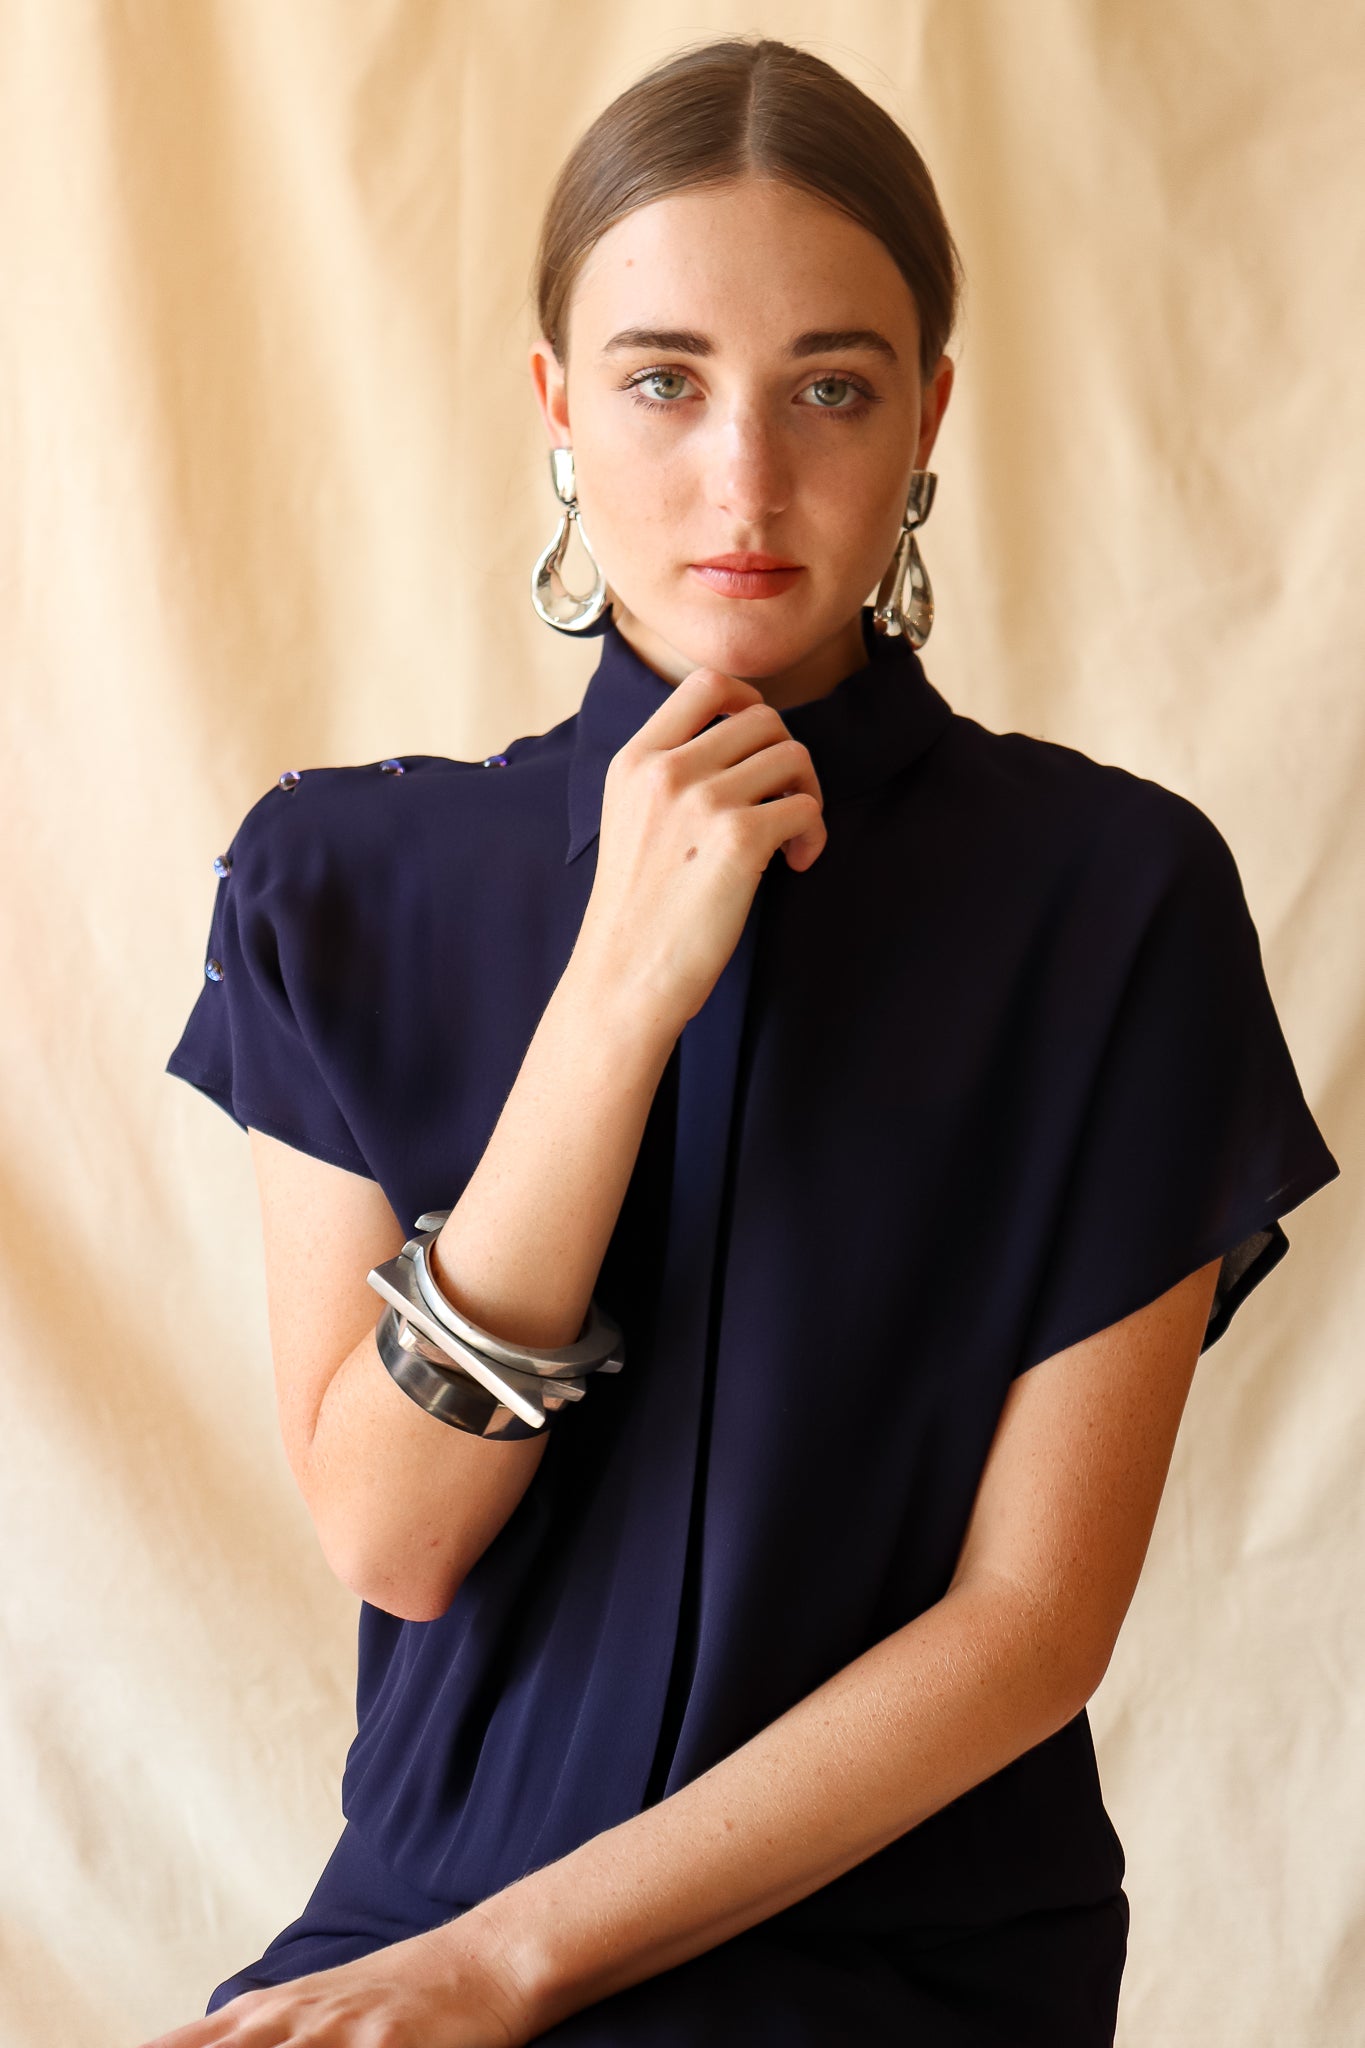 Recess Vintage Consignment LA Girl in sheer navy Karl Lagerfeld Dress with bracelets